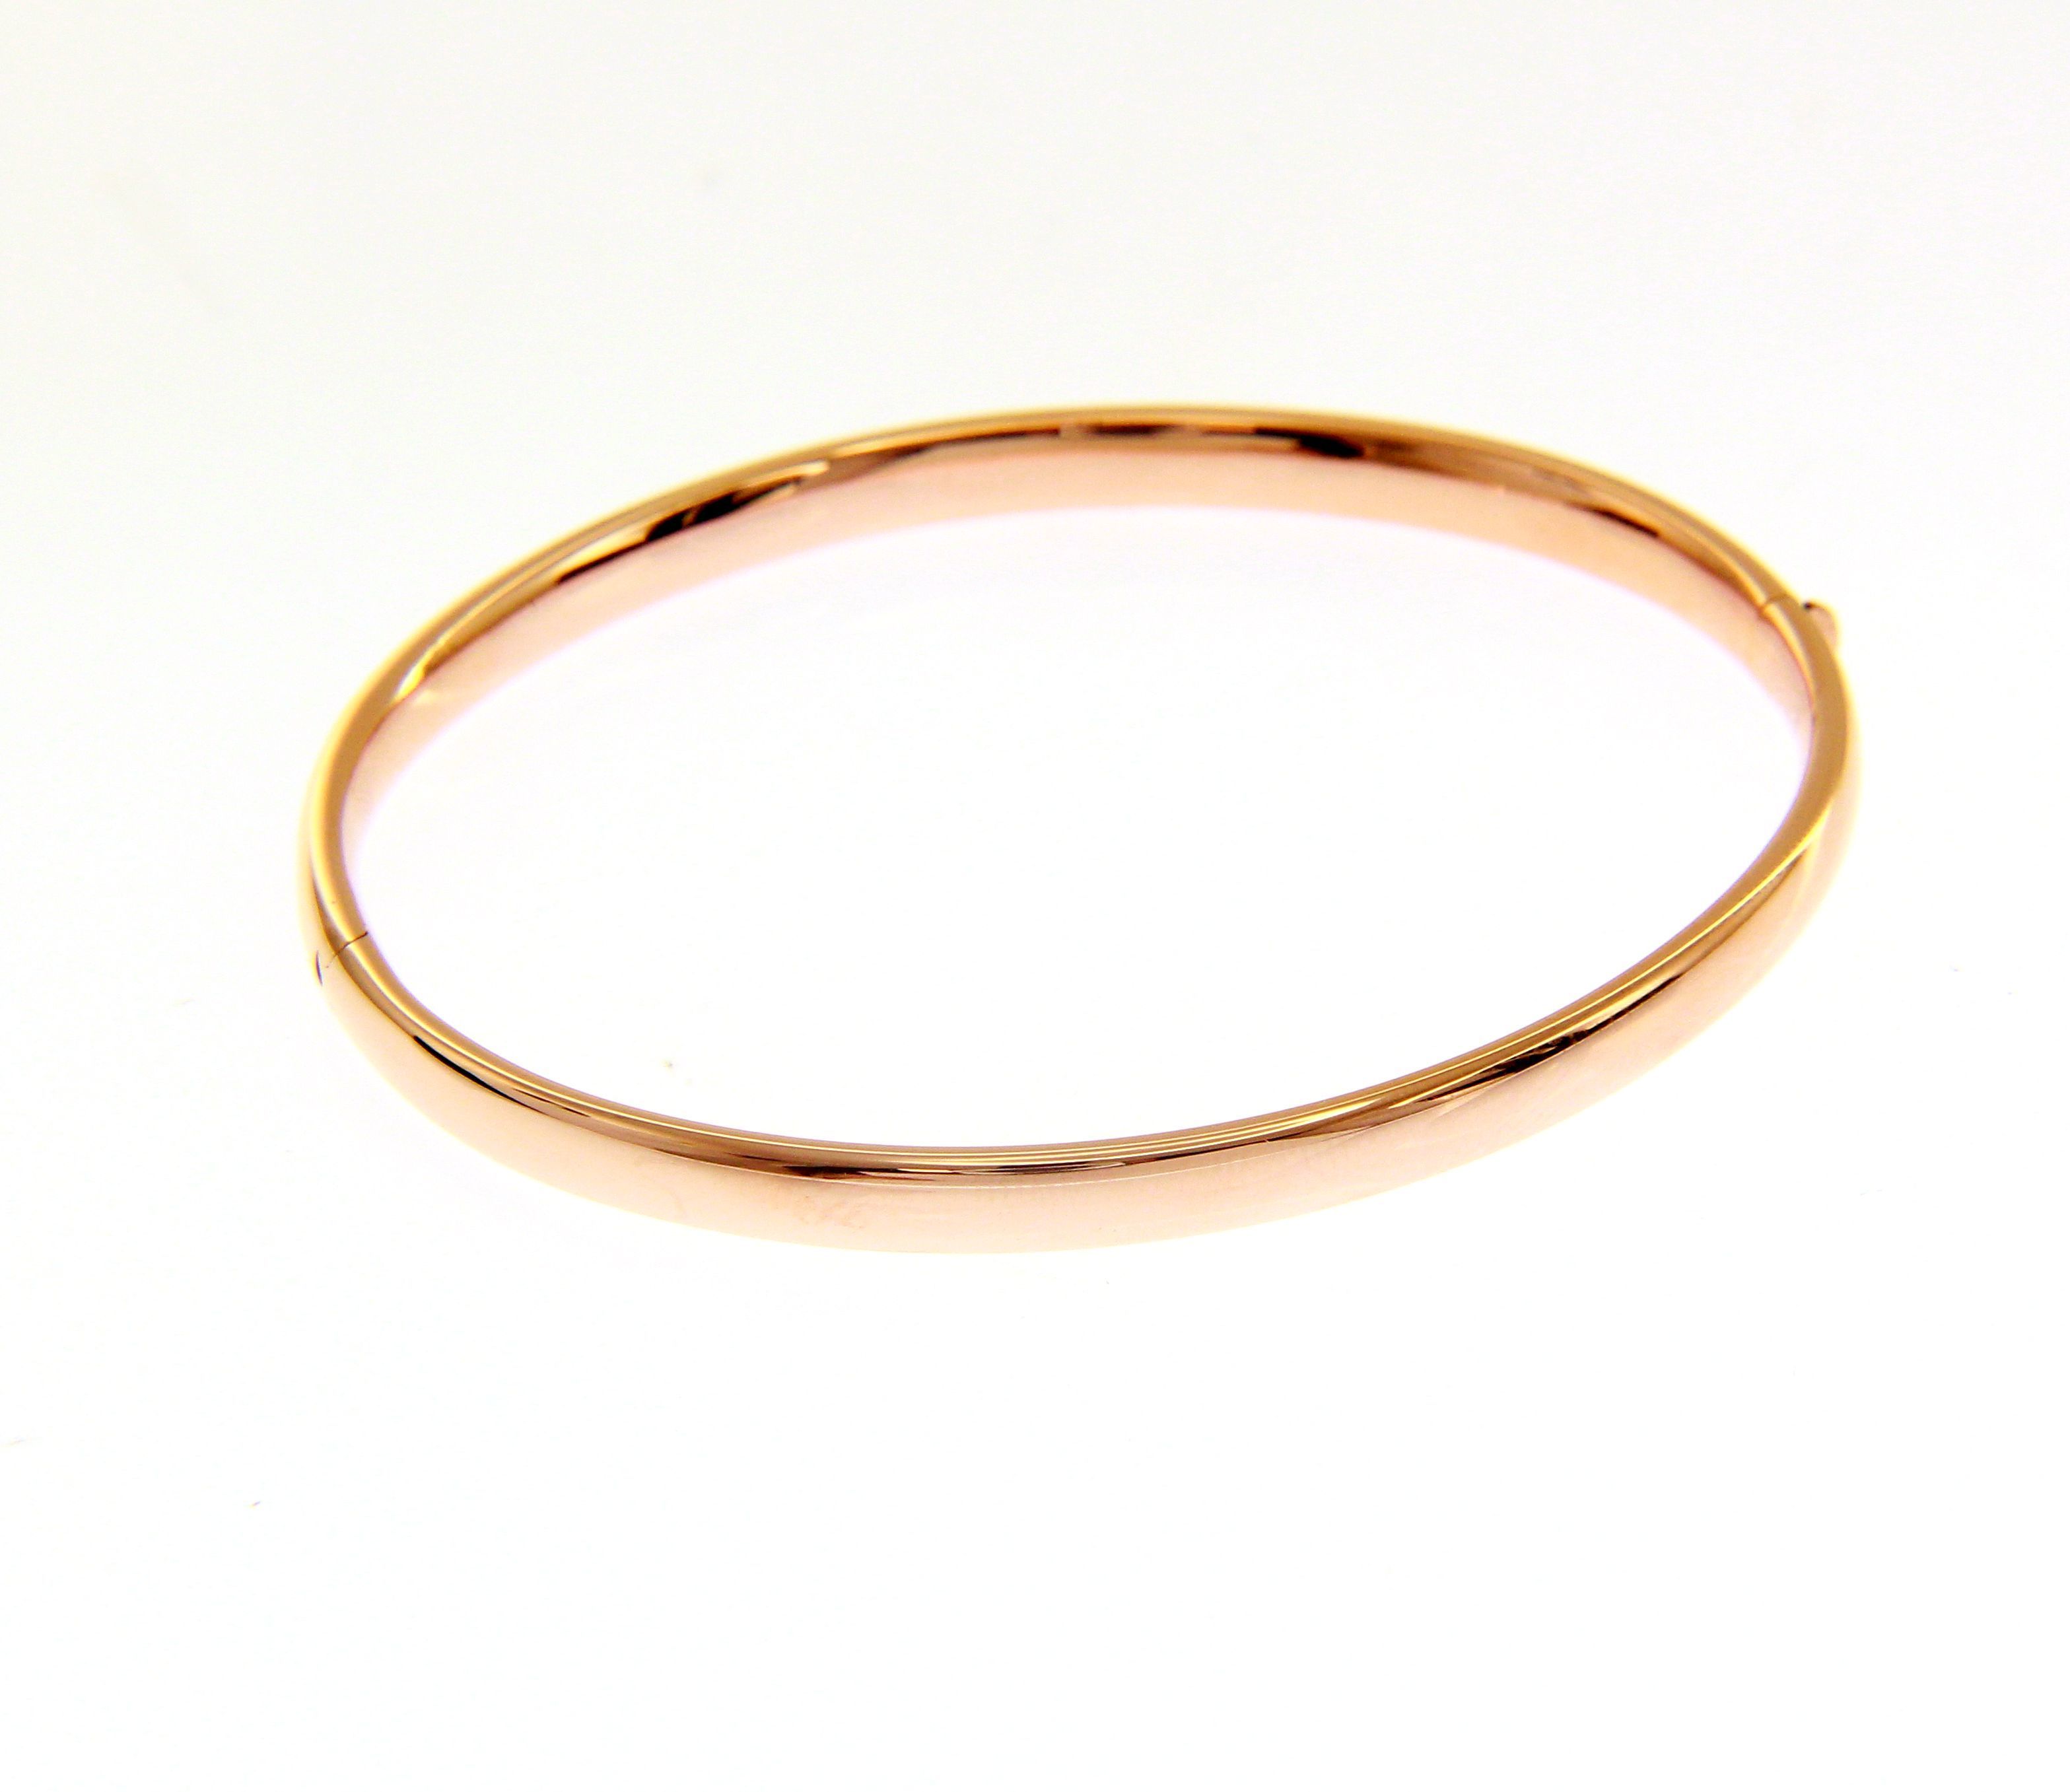 Rose gold oval bracelet with clasp k14 (code S205080)